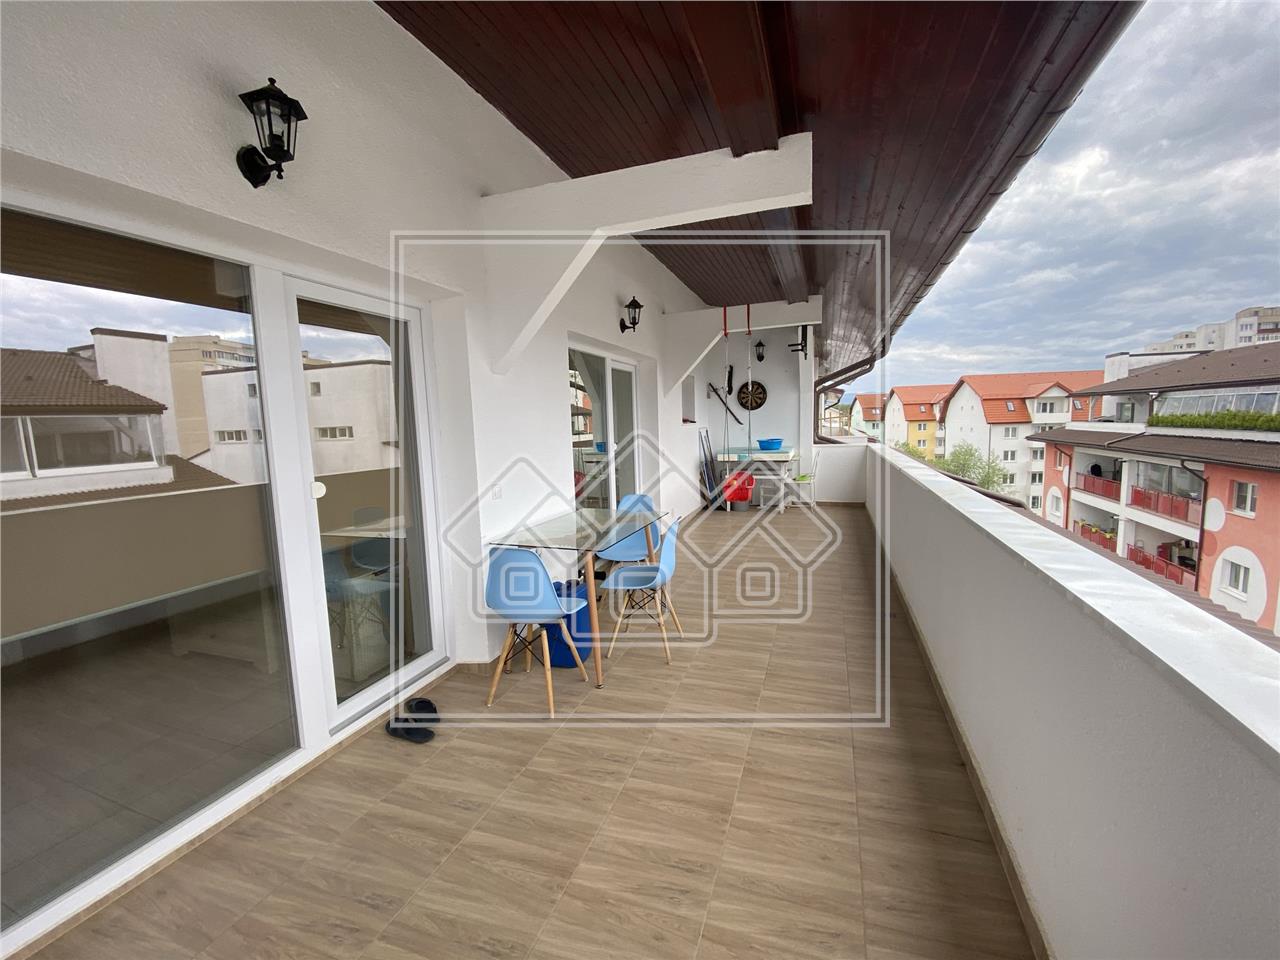 Penthouse for sale in Sibiu - 101 usable sqm - 2 terraces